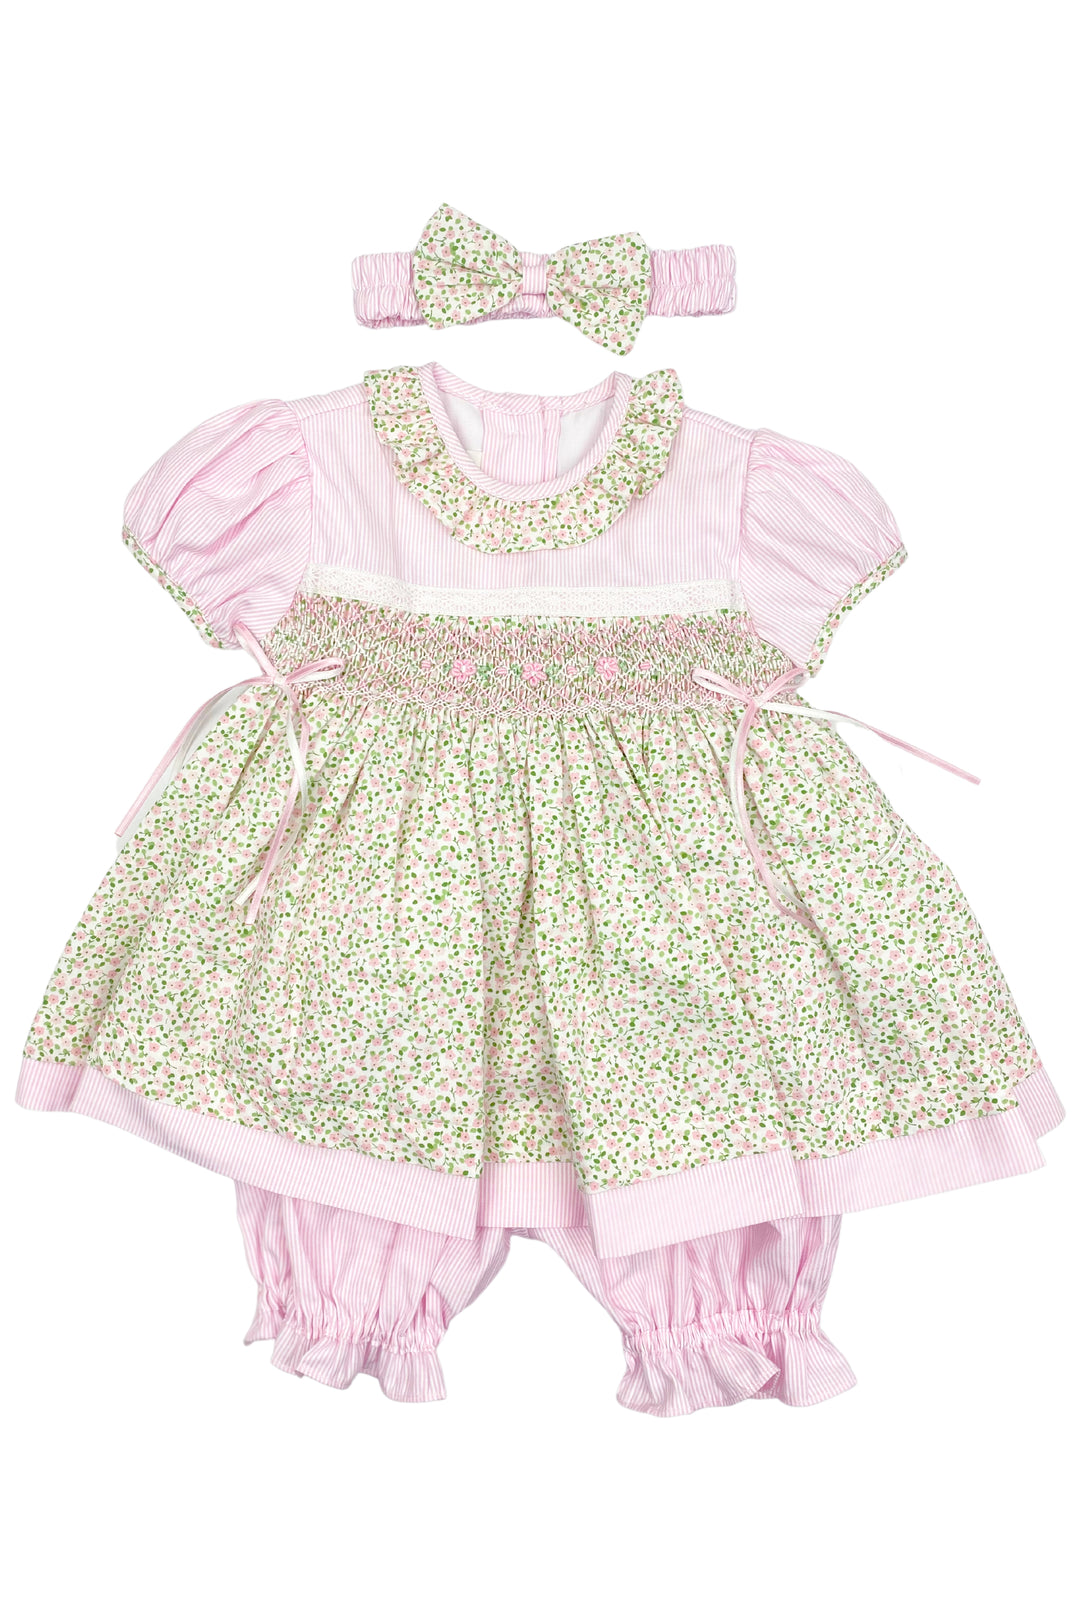 Pretty Originals "Lydia" Pink Floral Smocked Dress, Bloomers & Headband | Millie and John